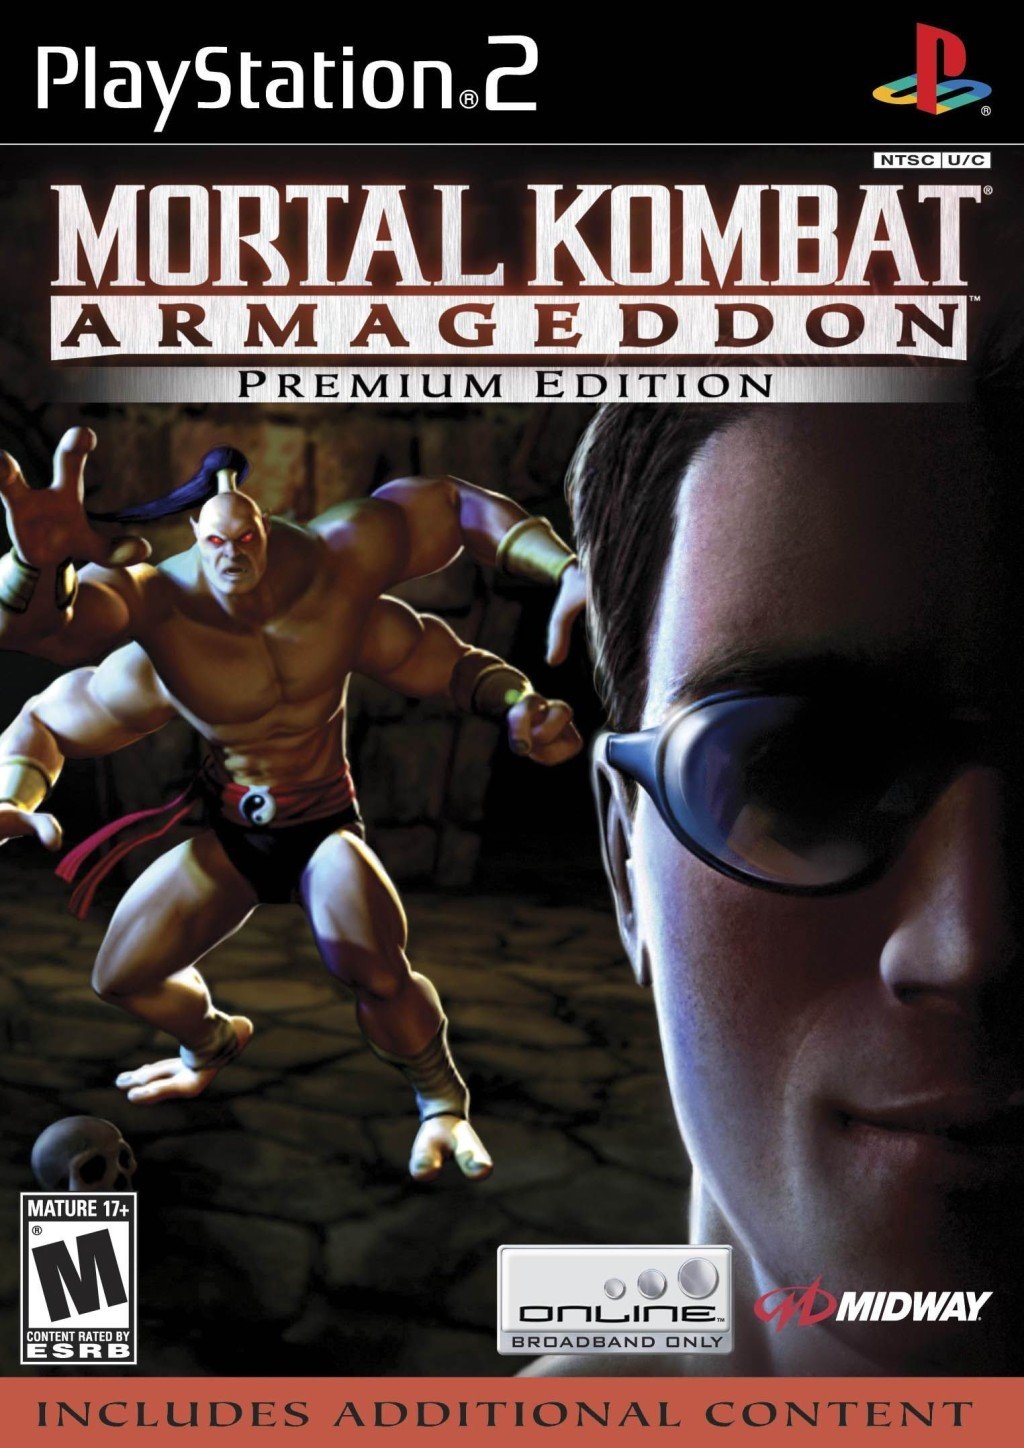 Mortal Kombat: Armageddon Xbox 360 Cover by RuthlessGuide1468 on DeviantArt